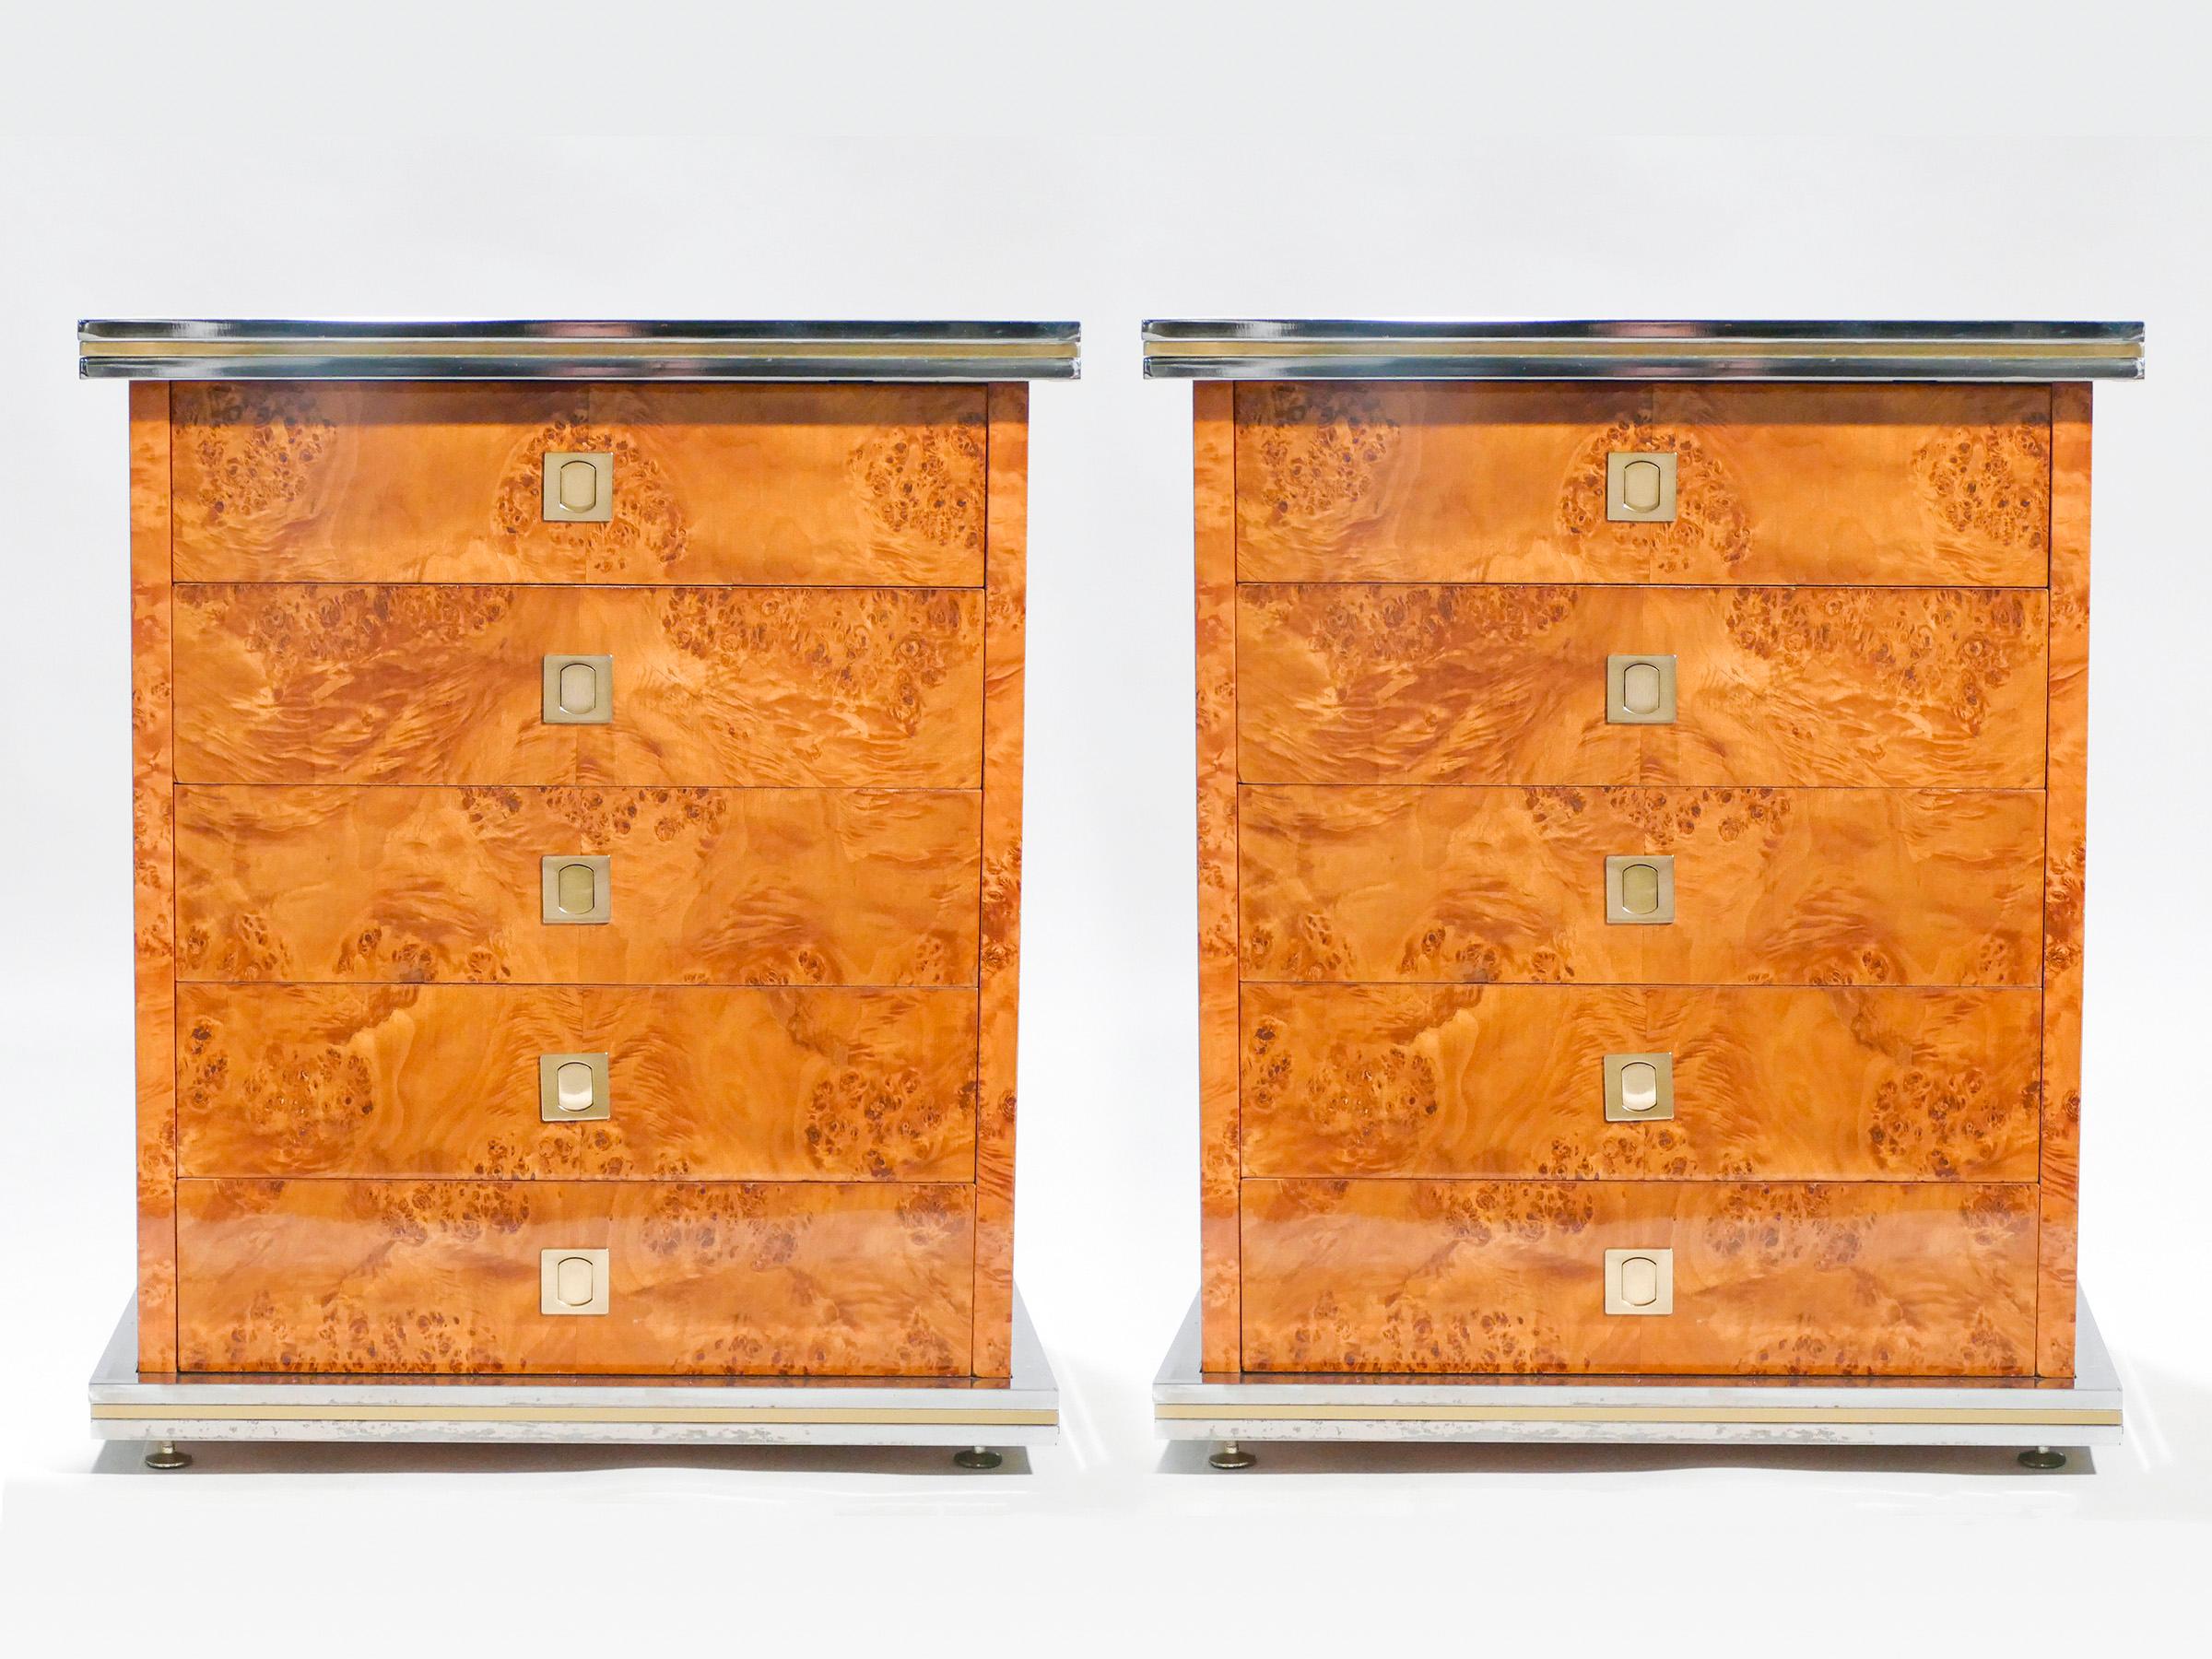 A rare and breathtaking Italian Hollywood Regency pair by Willy Rizzo from the 1970s, these chests of drawers have a bright and high-end feel, a relic of his time designing for the glamorous members of the so-called dolce VITA. Rich lacquered burl